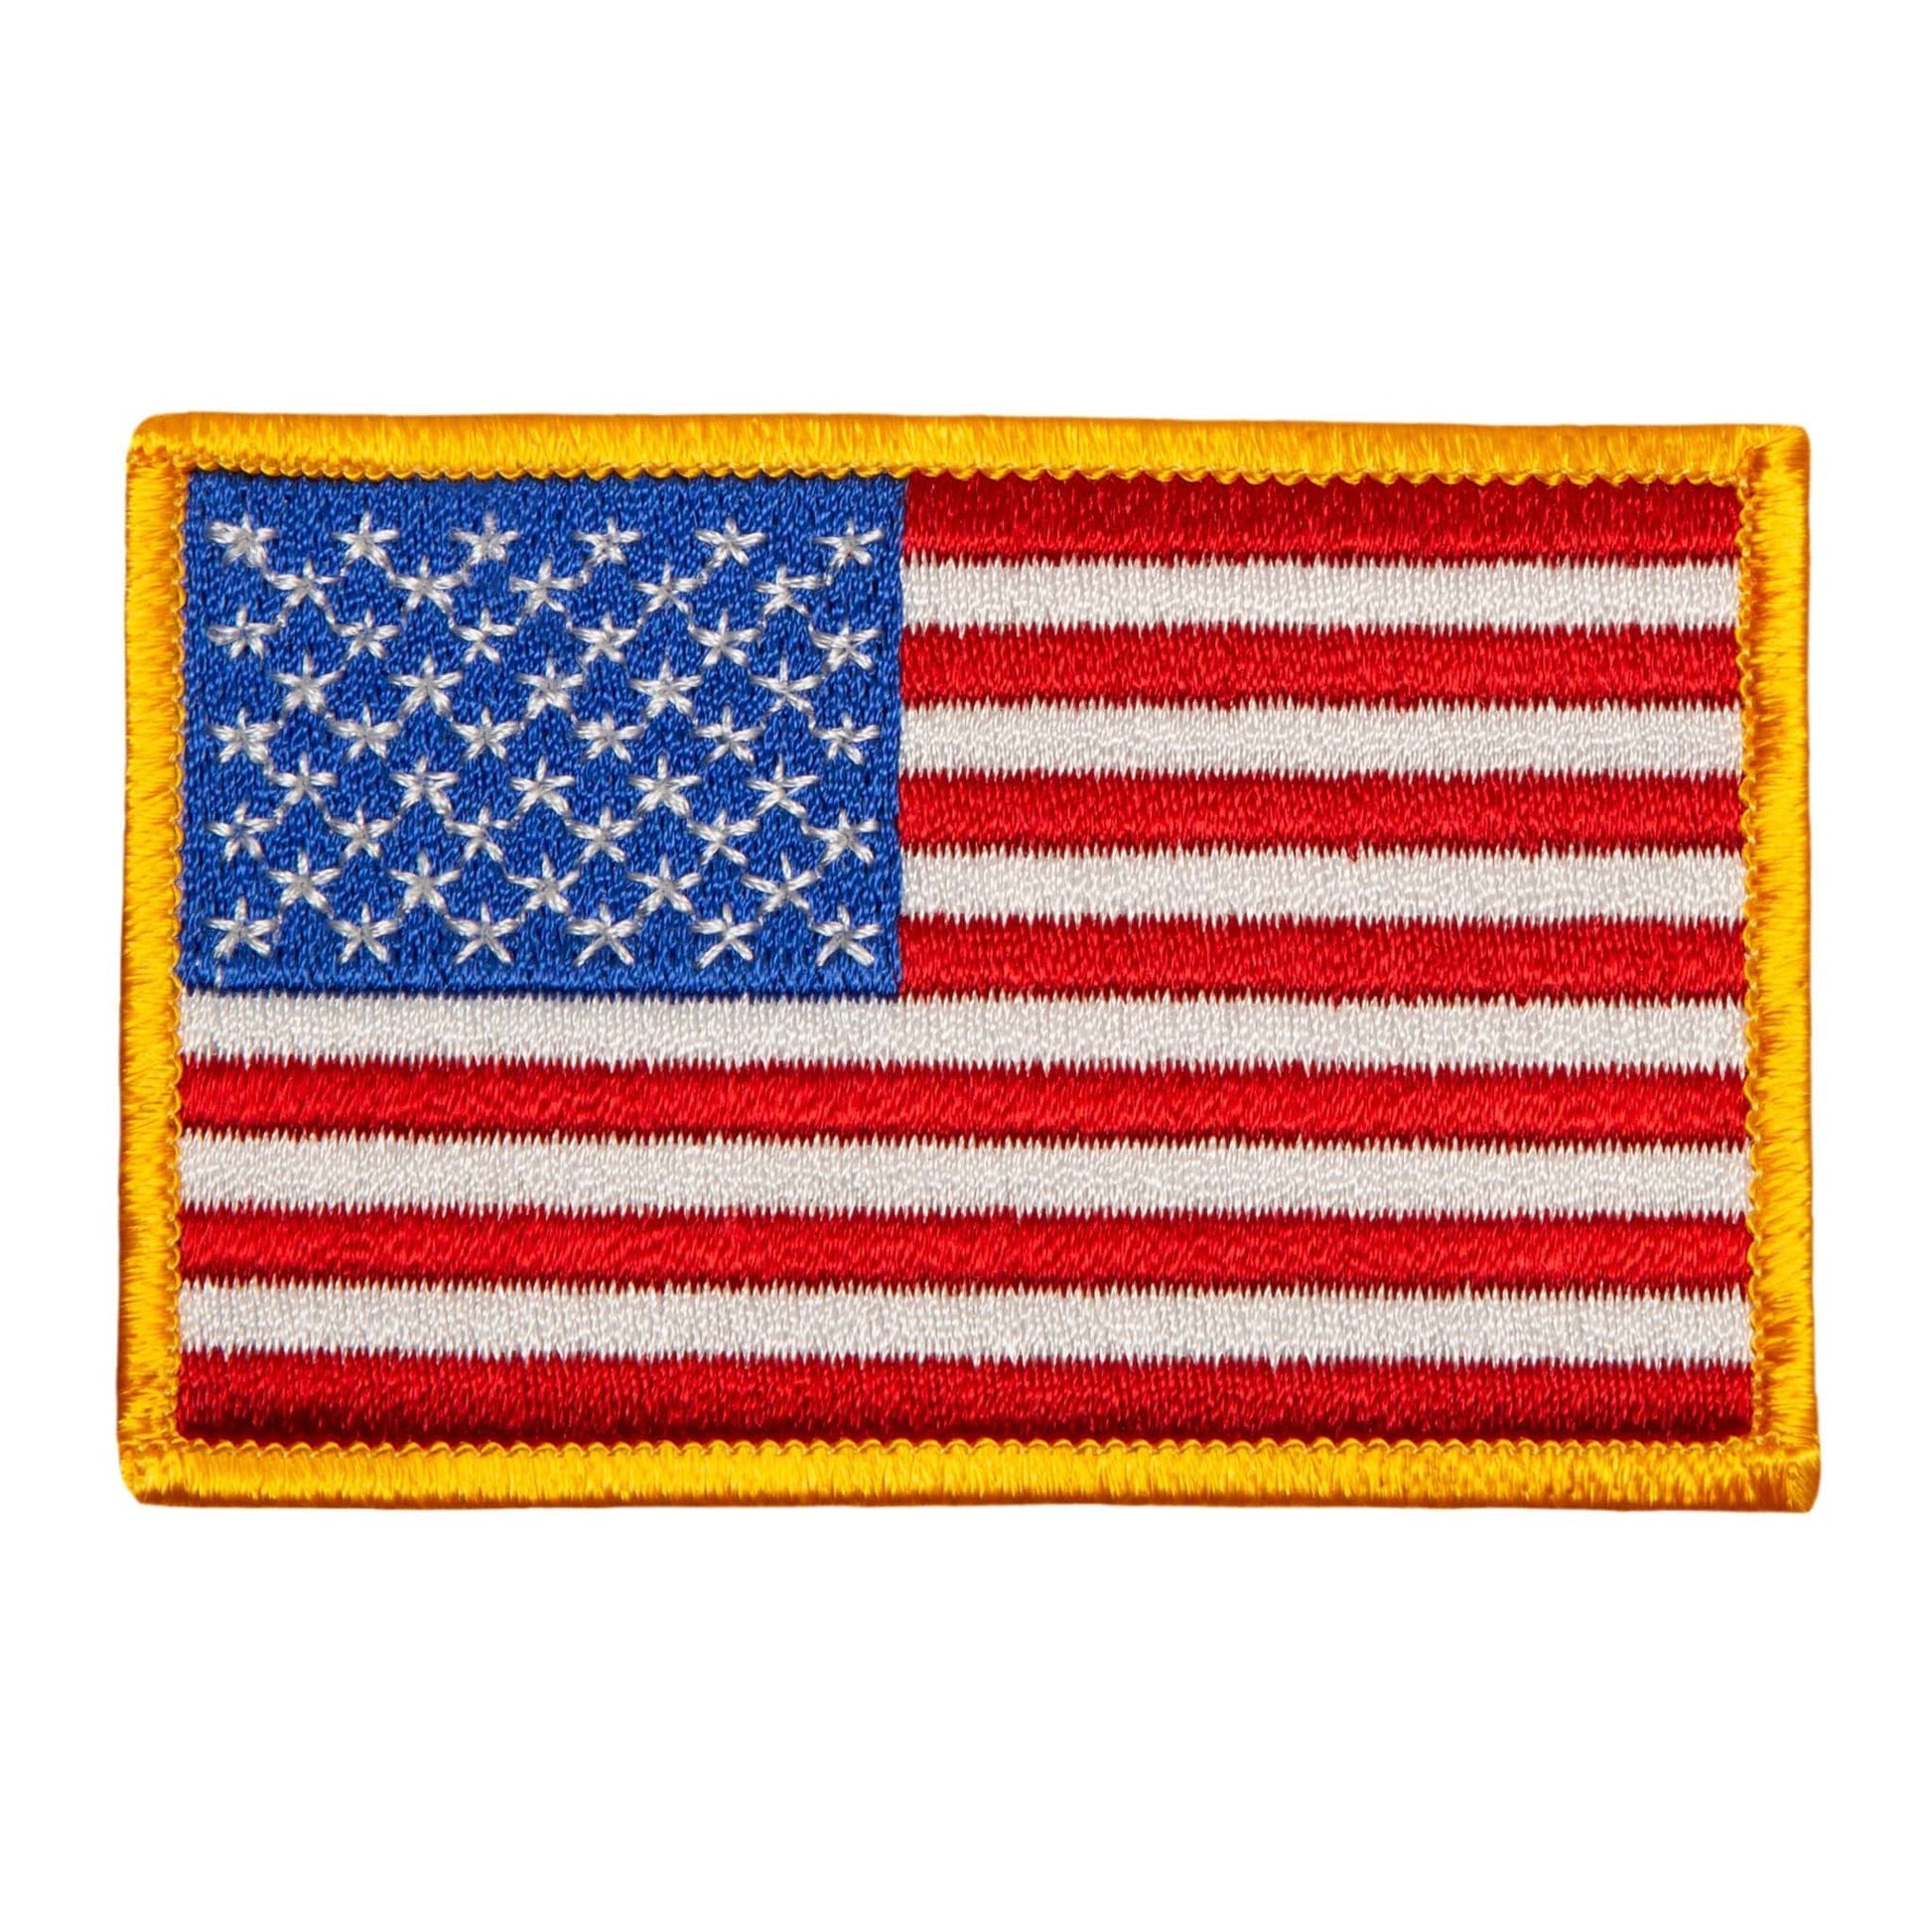 EclipseMartialArtsSupplies sporting goods USA American Flag Patch Left Sleeve